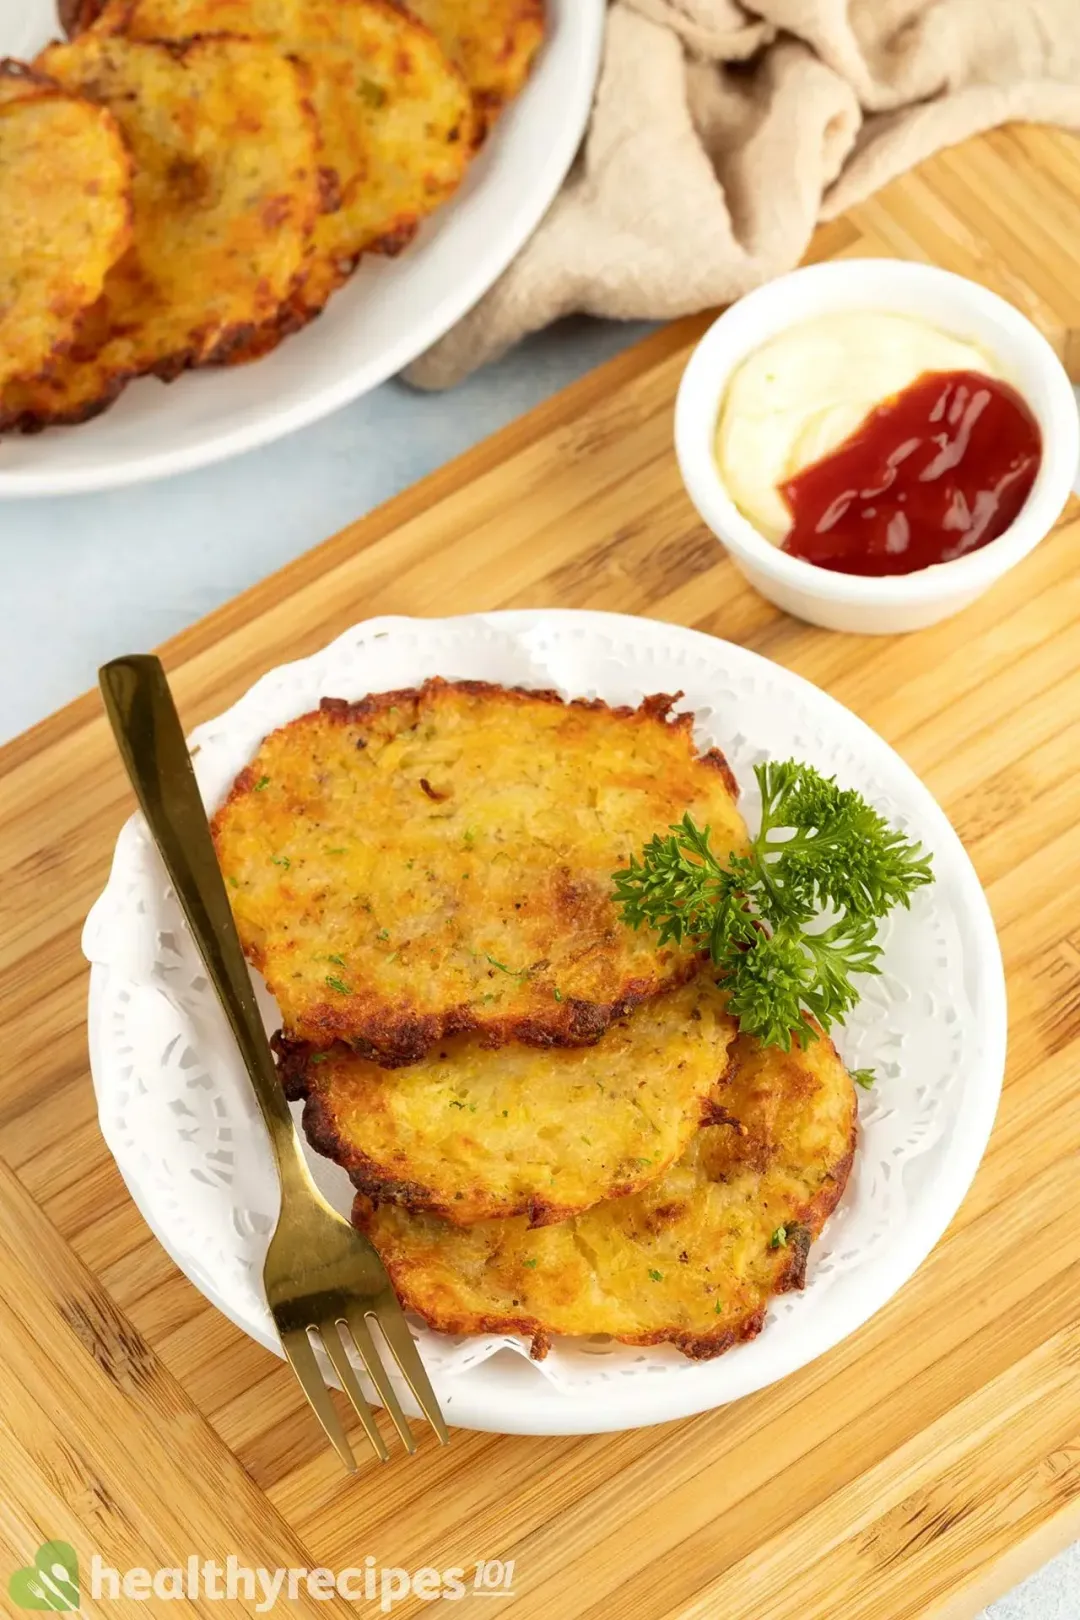 how to store and reheat hash browns